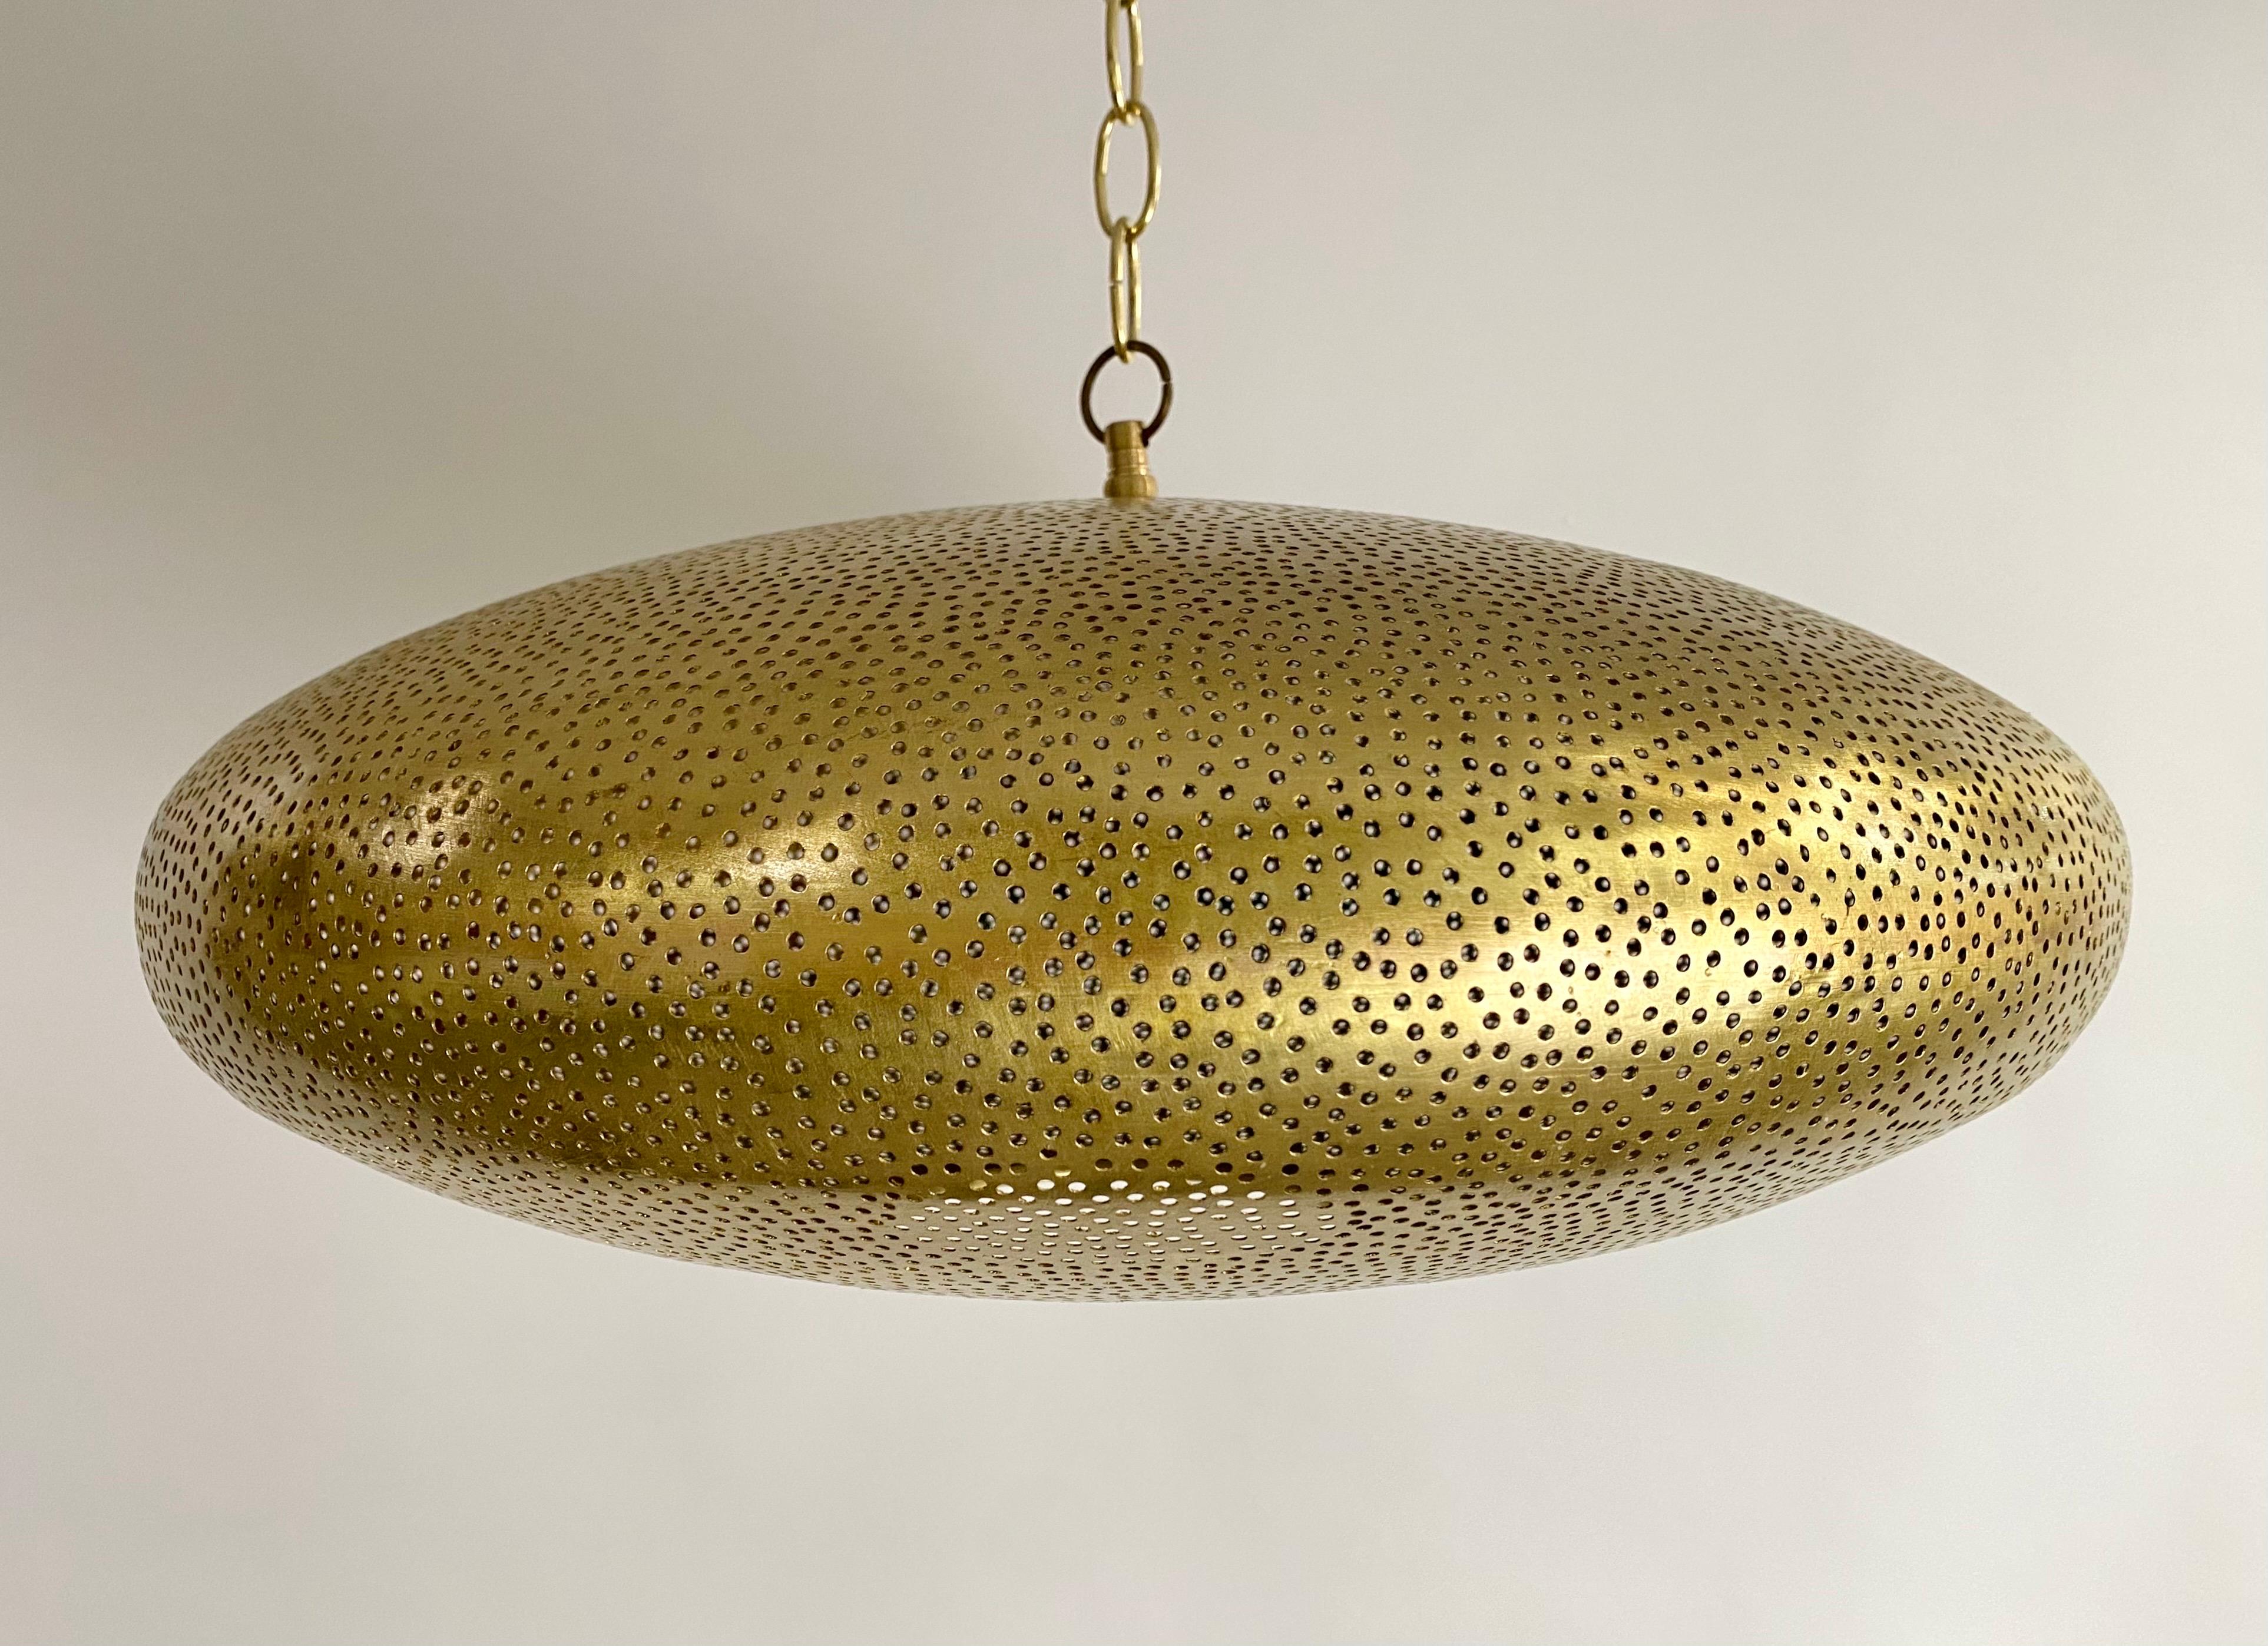 Hand-Crafted Mid-Century Modern Style Oval Spaceship Brass Pendant or Lantern For Sale